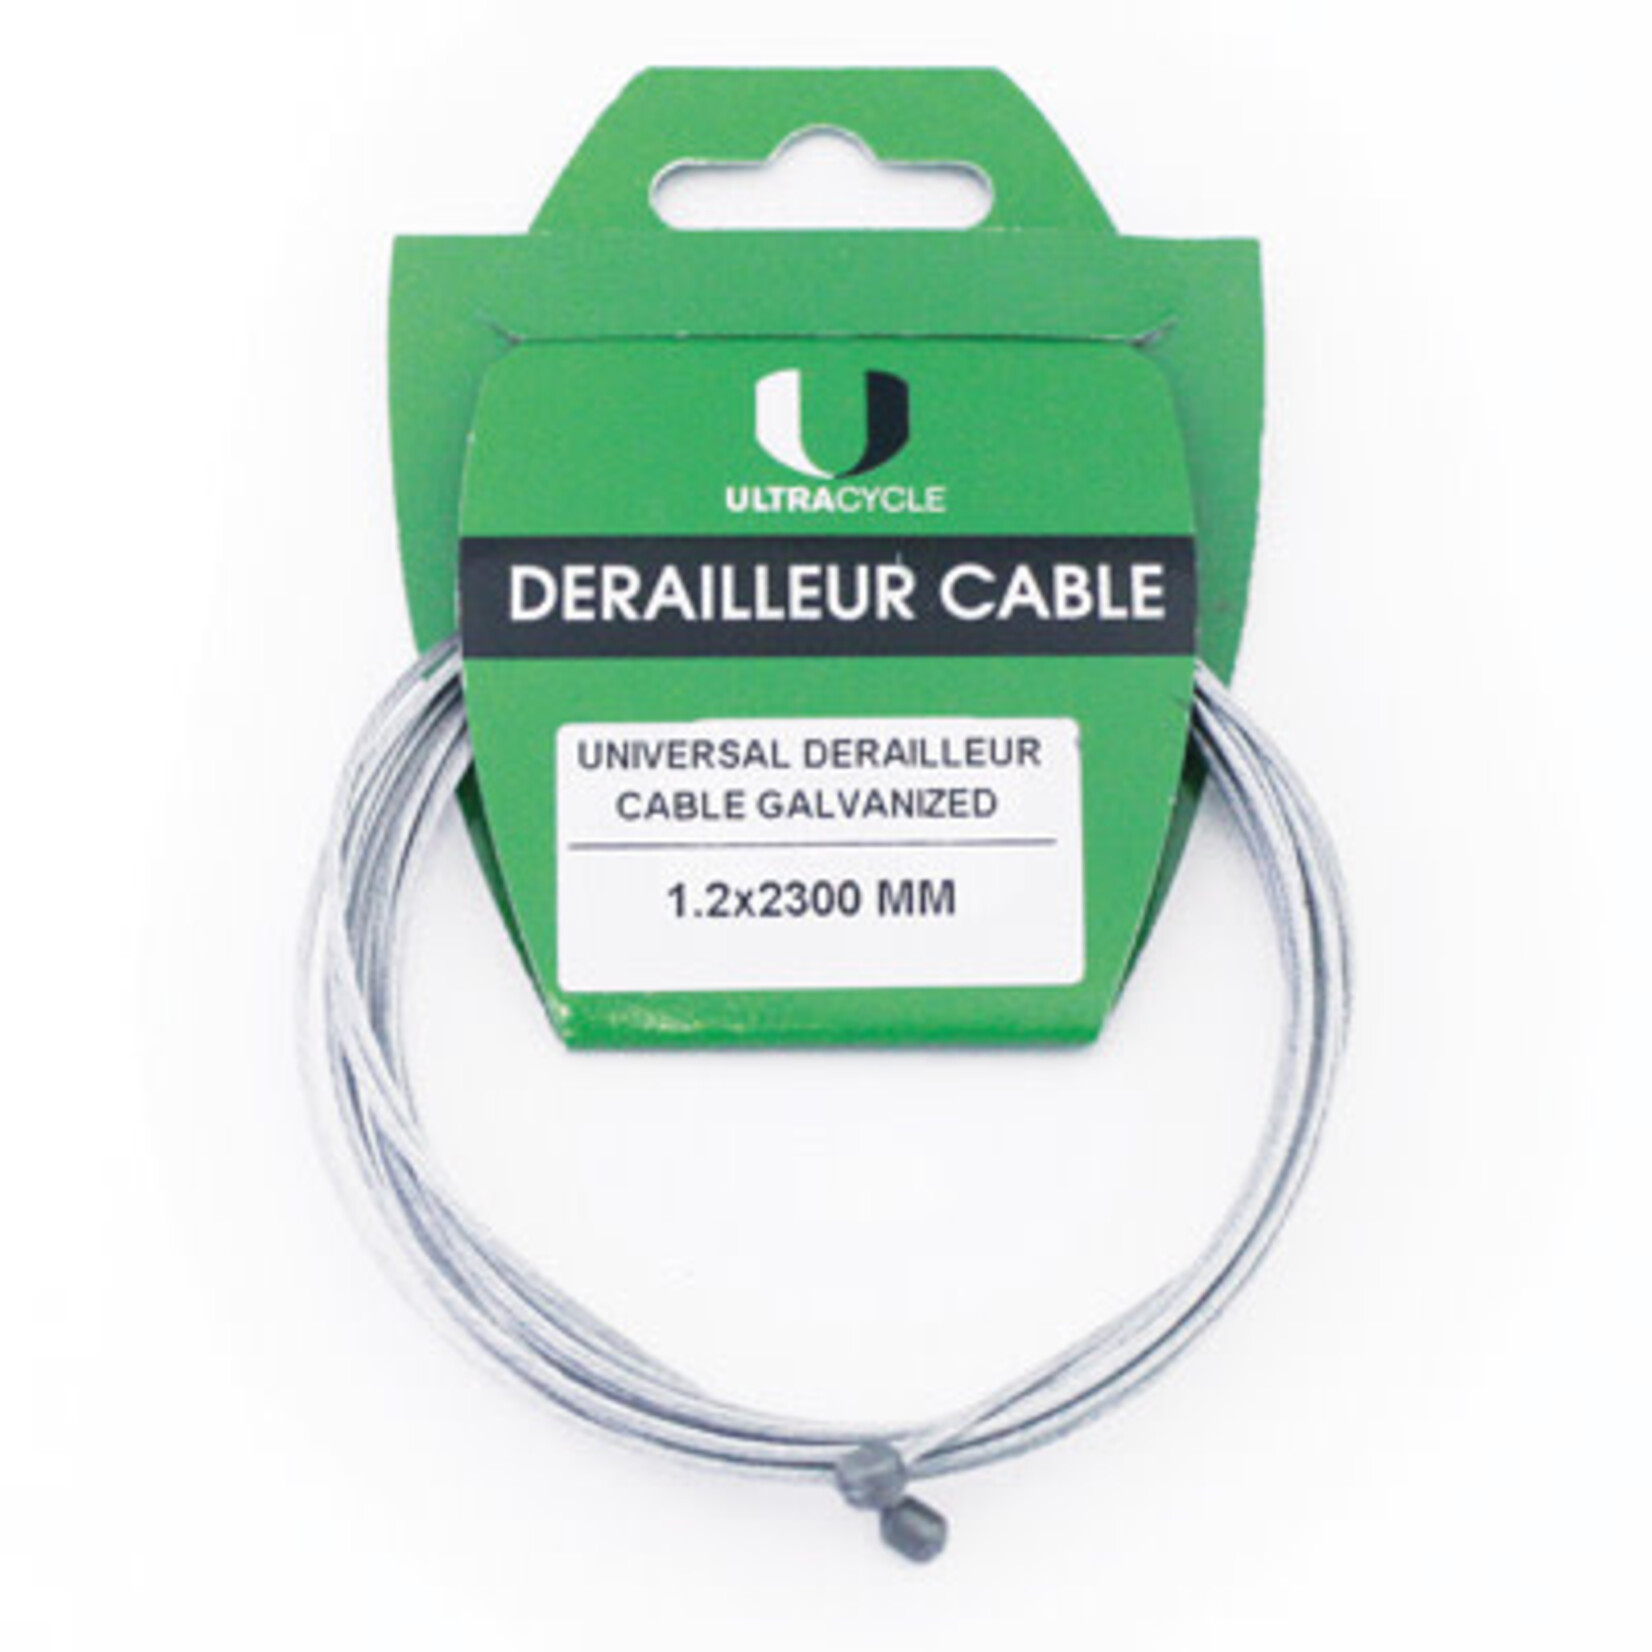 ULTRACYCLE Ultracycle - Slick Derailleur Cable 1.1x3100 Tandem Length